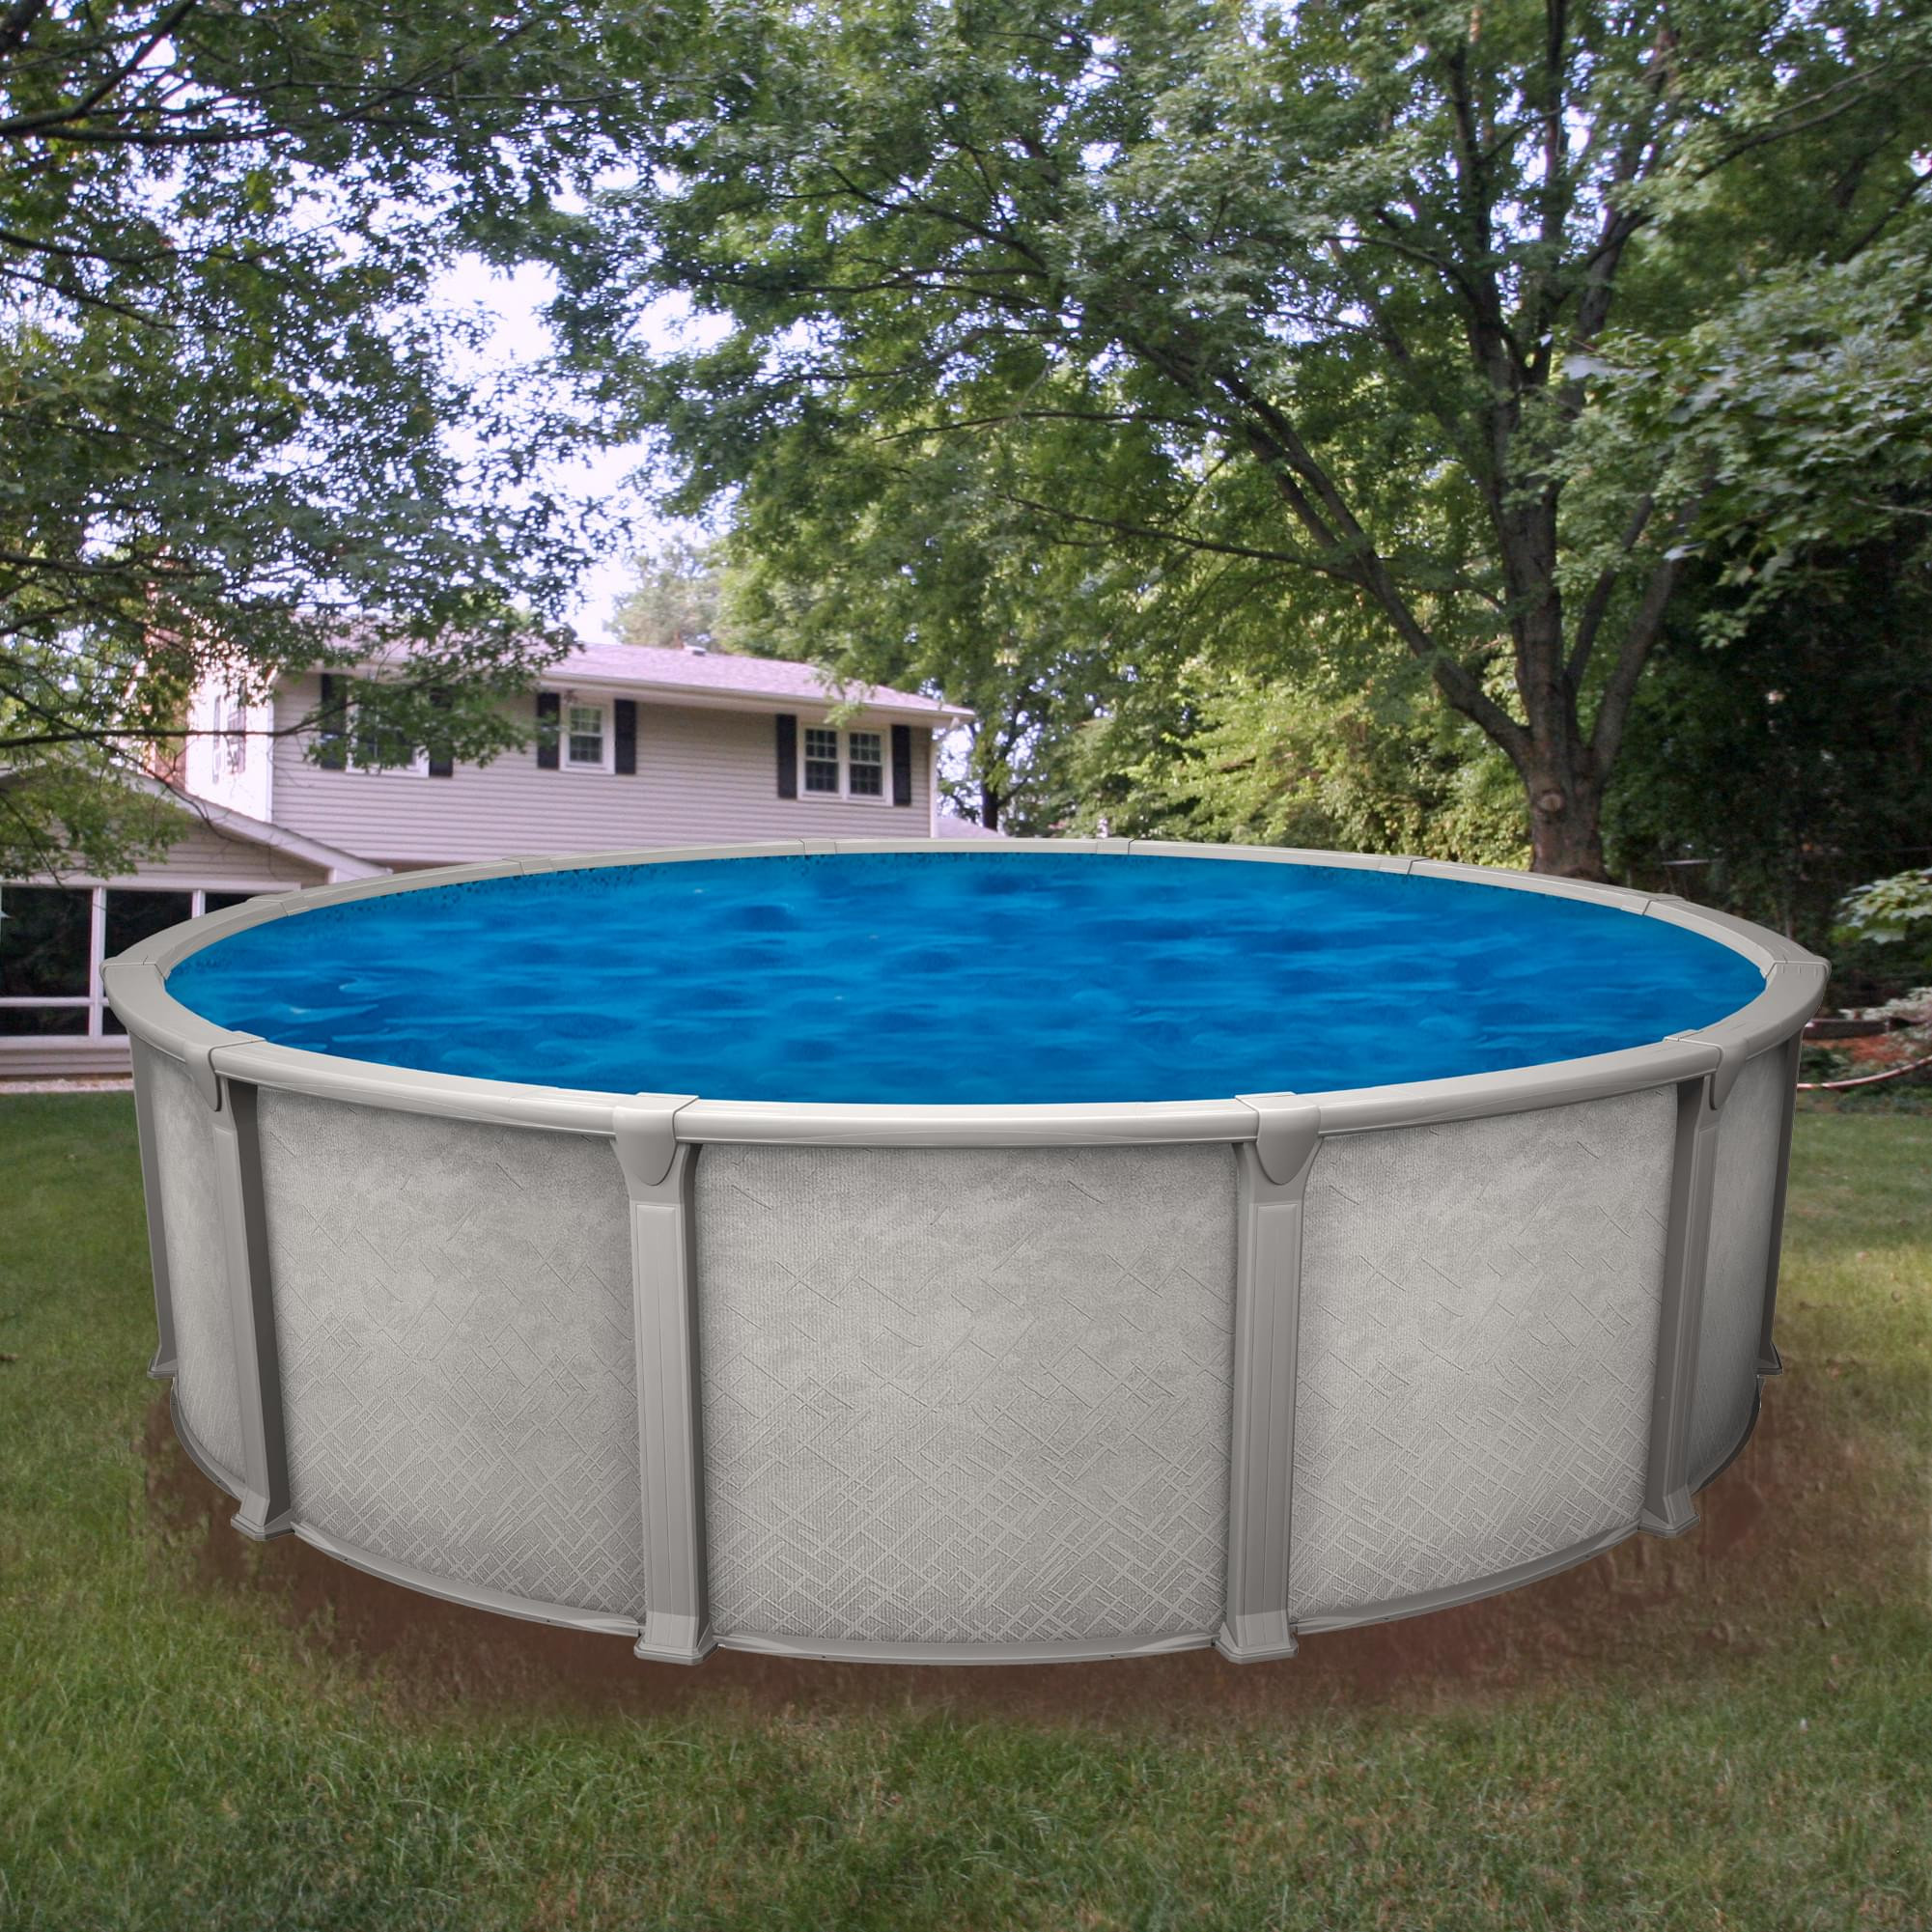 15 Above Ground Pool
 Pool Covers & Rollers Home & Garden Pool Leaf Net